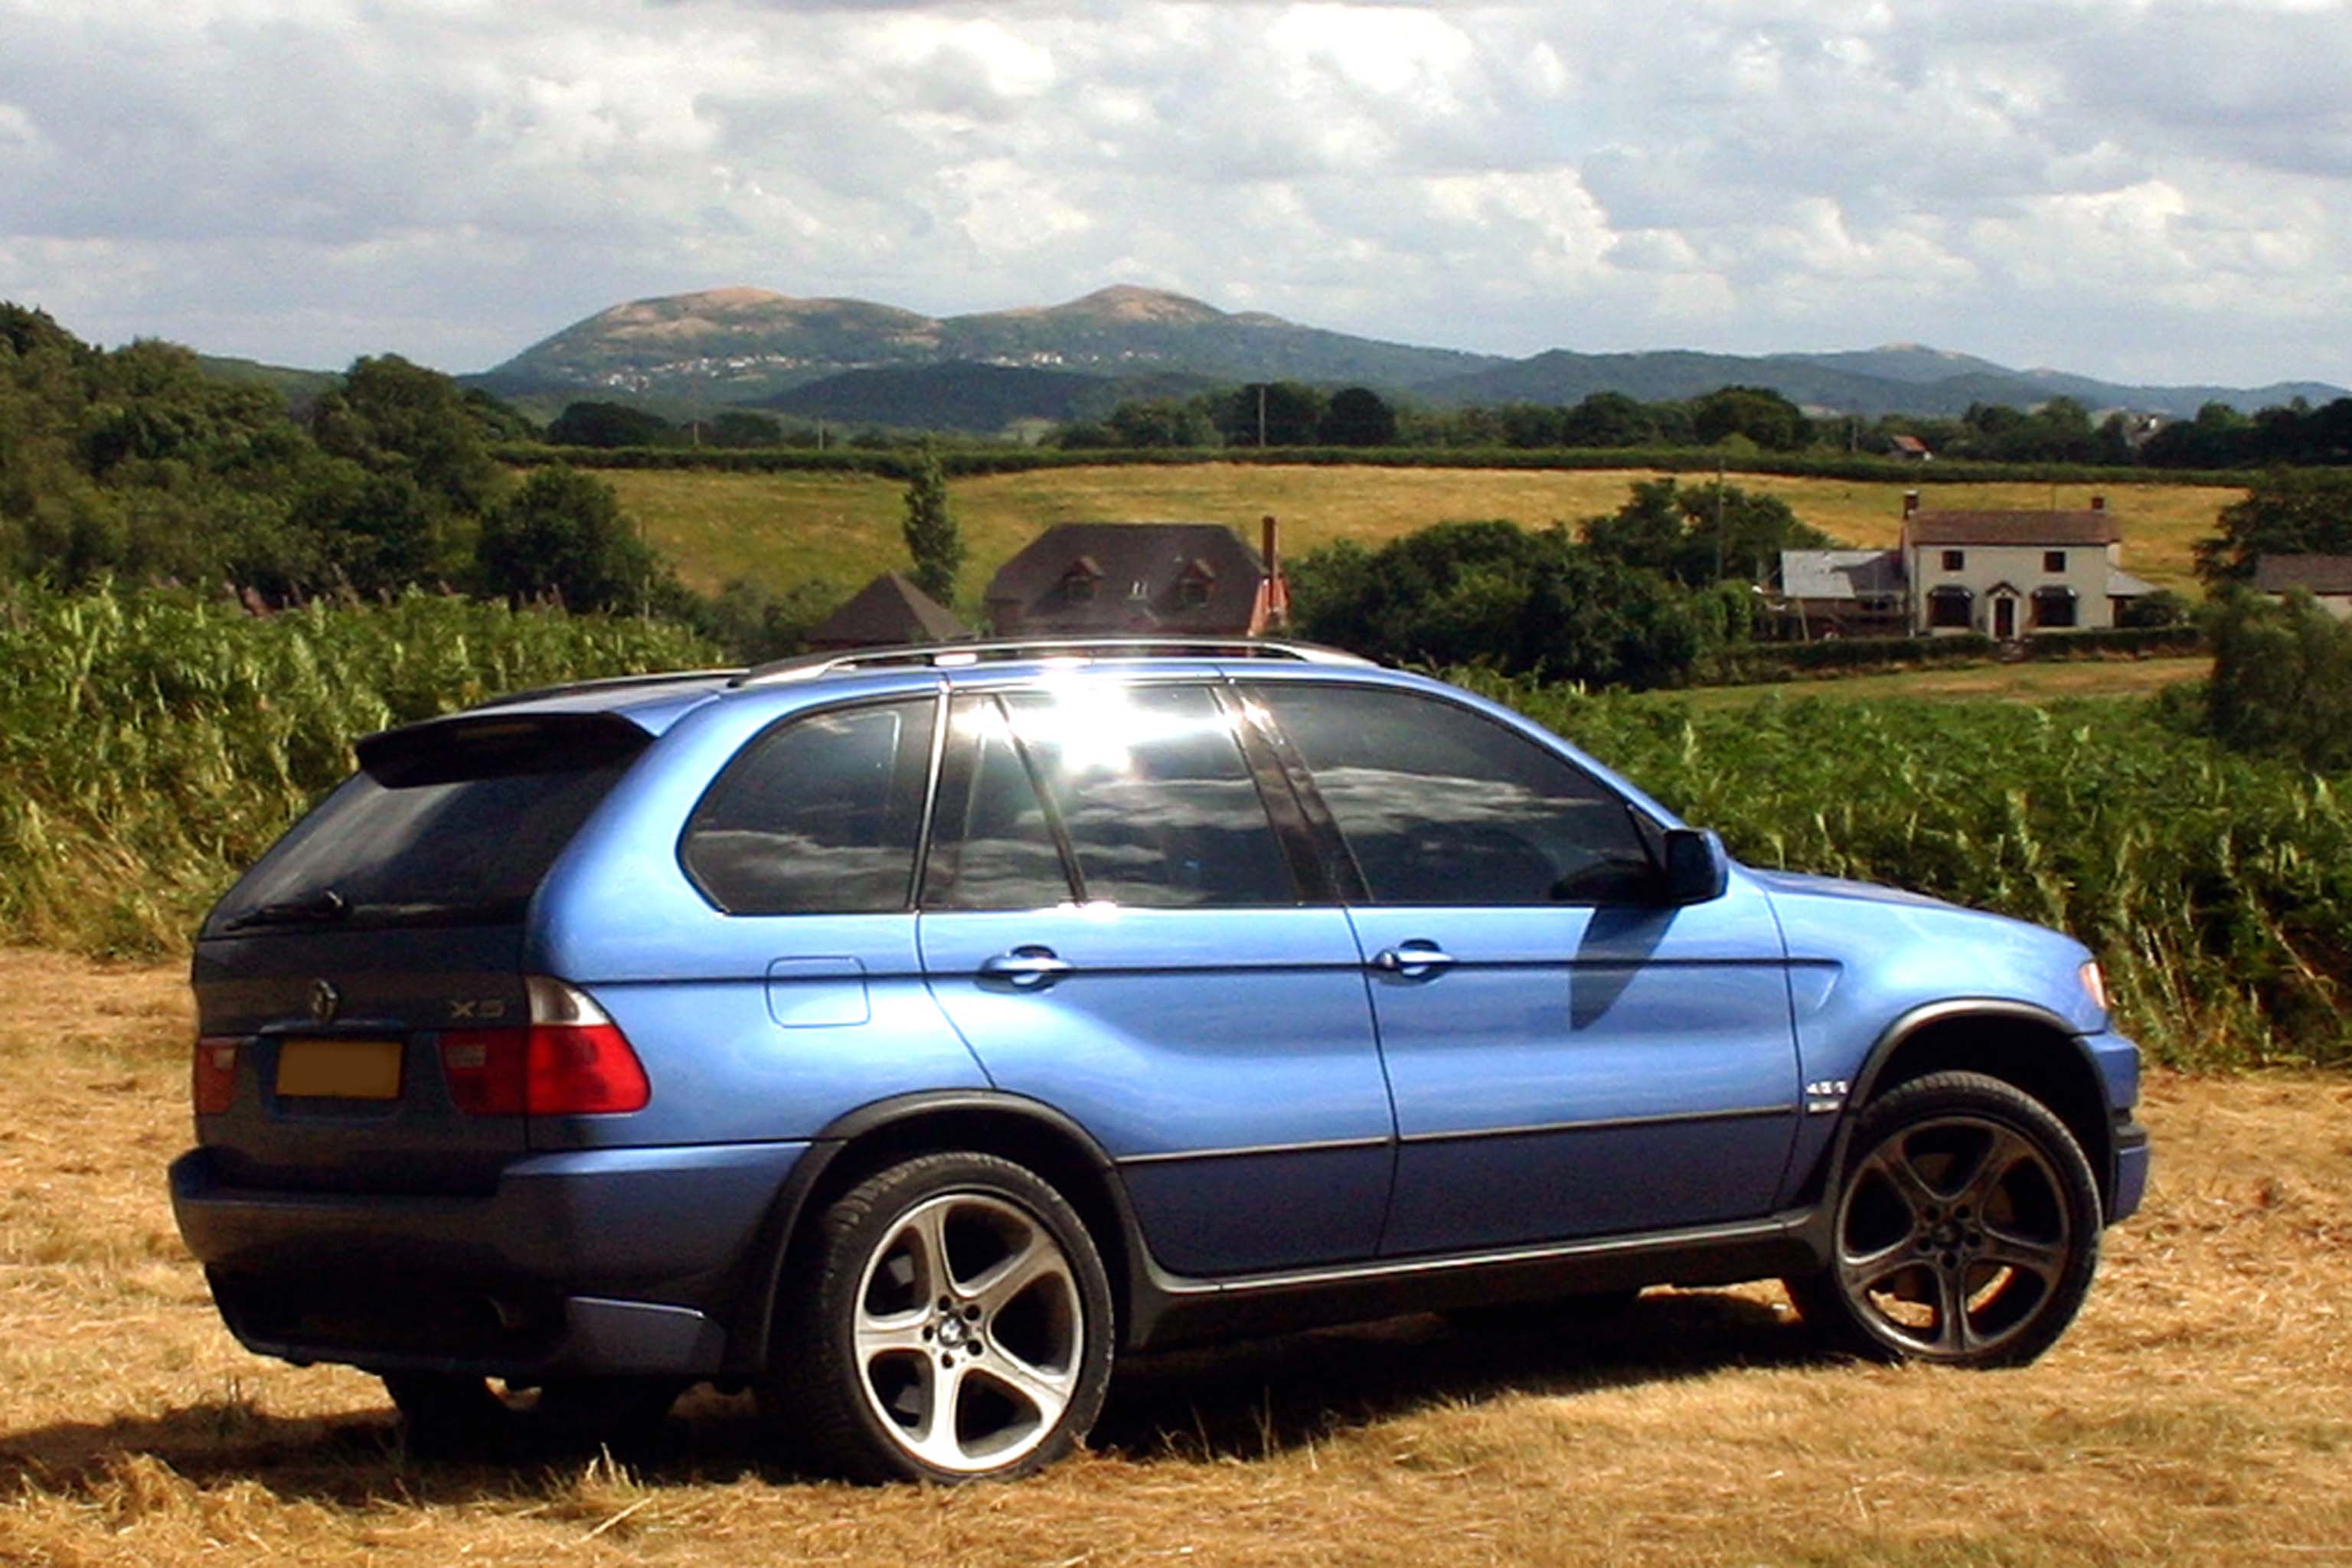 X5 4.6is - set course for home, maximum borkfactor! - Page 2 - Readers' Cars - PistonHeads